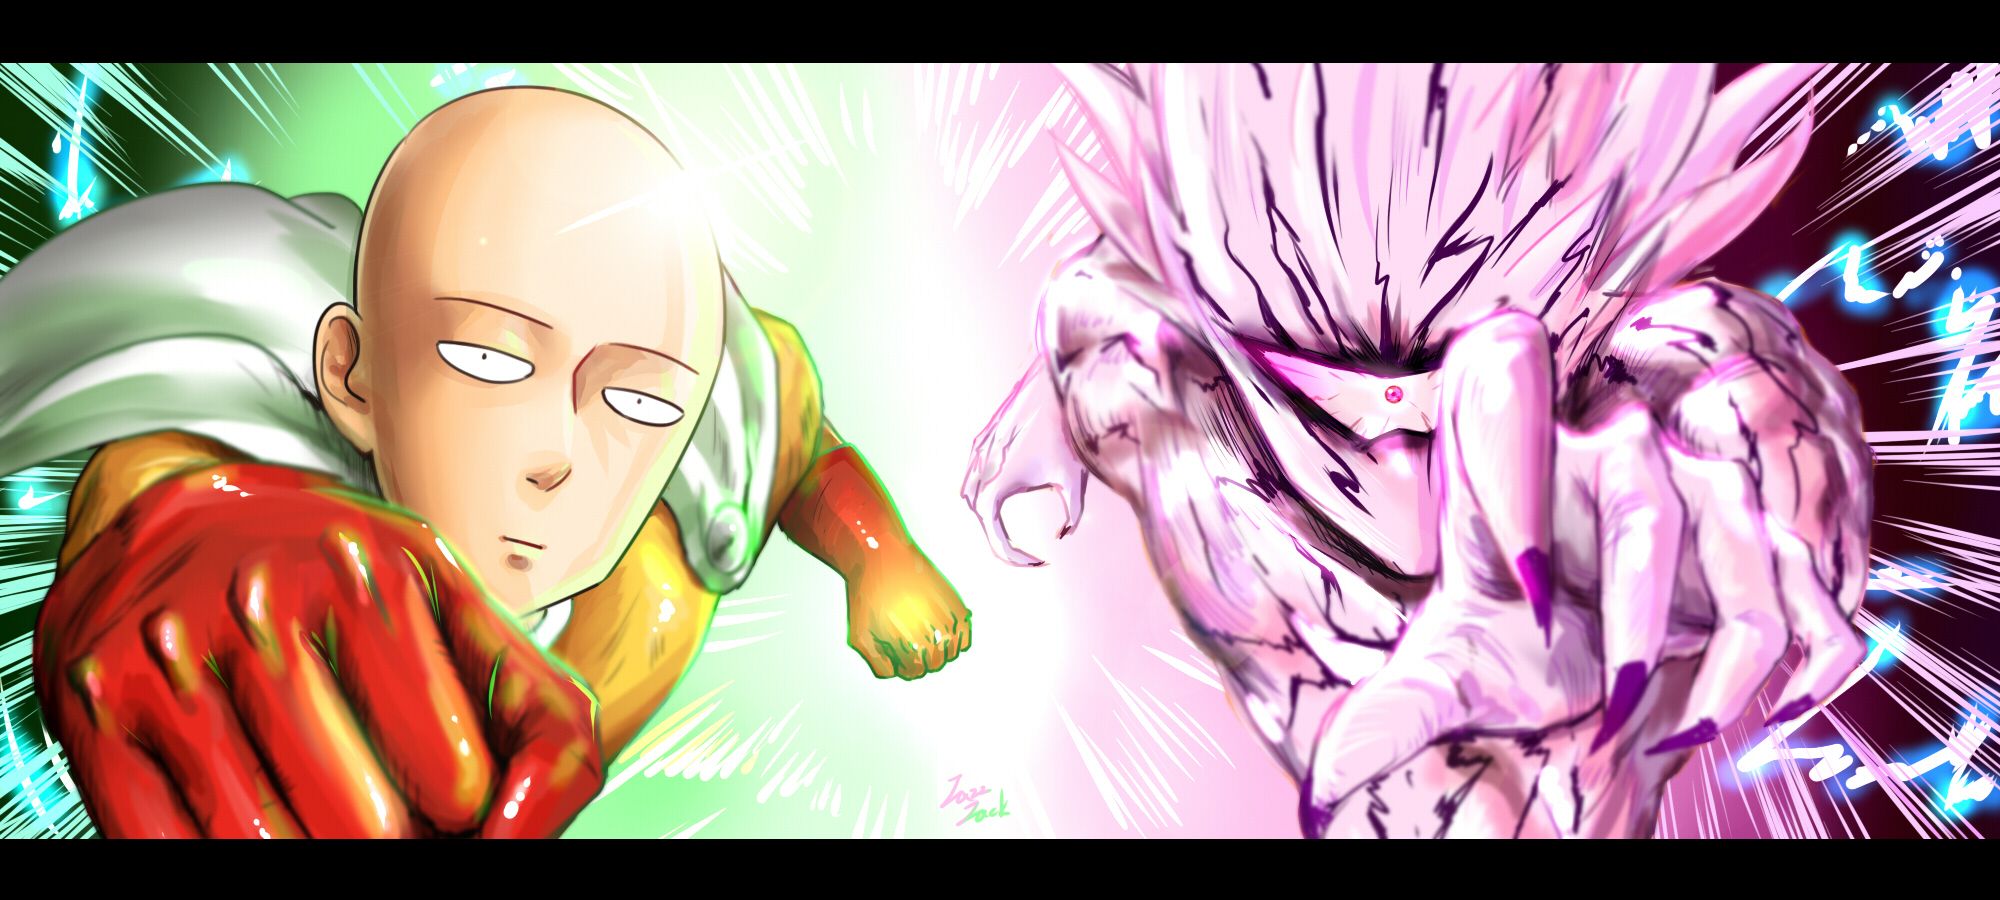 Boros Art Hd One-Punch Man Wallpapers